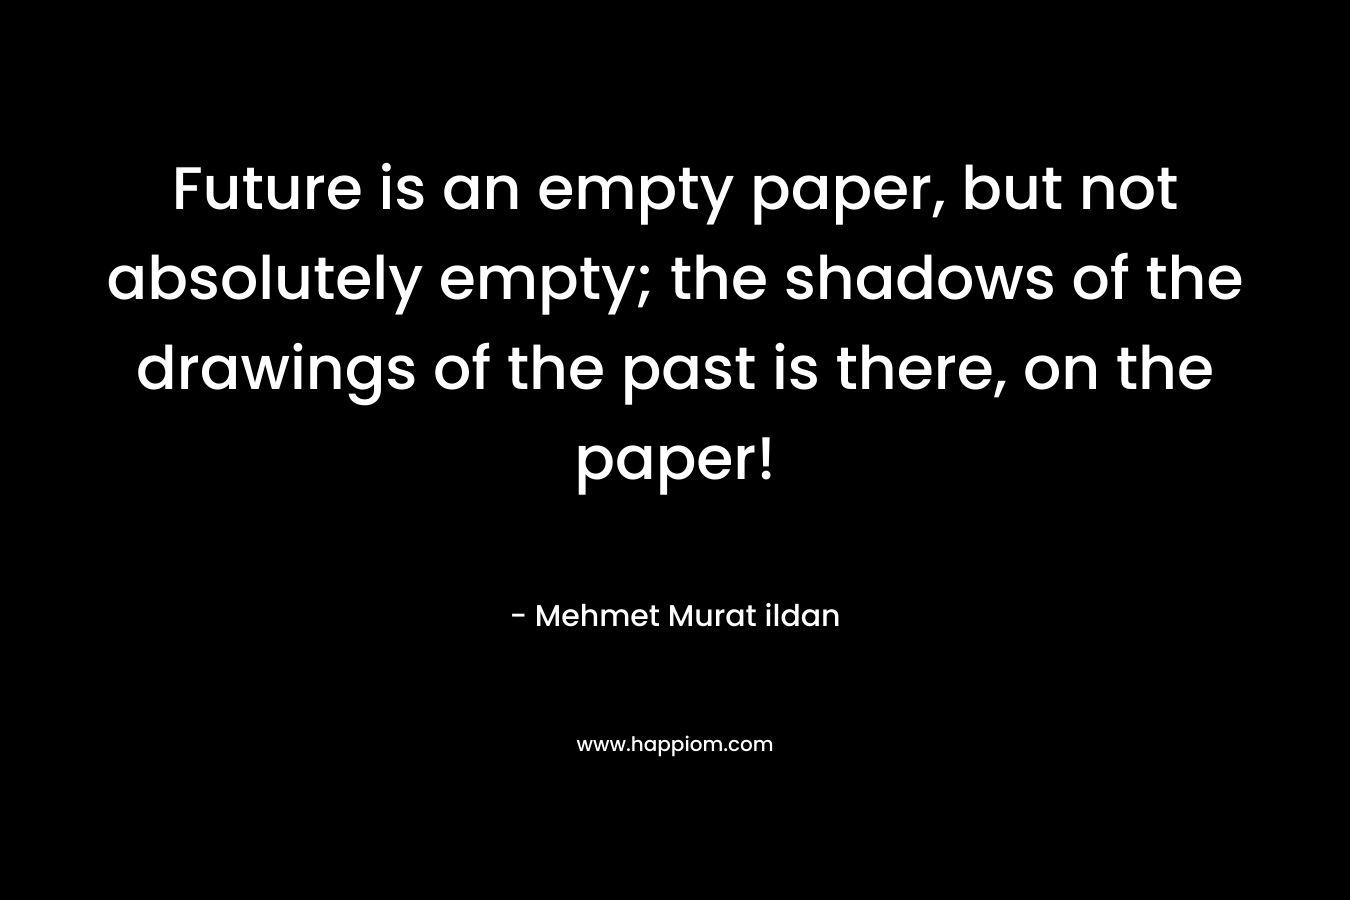 Future is an empty paper, but not absolutely empty; the shadows of the drawings of the past is there, on the paper!